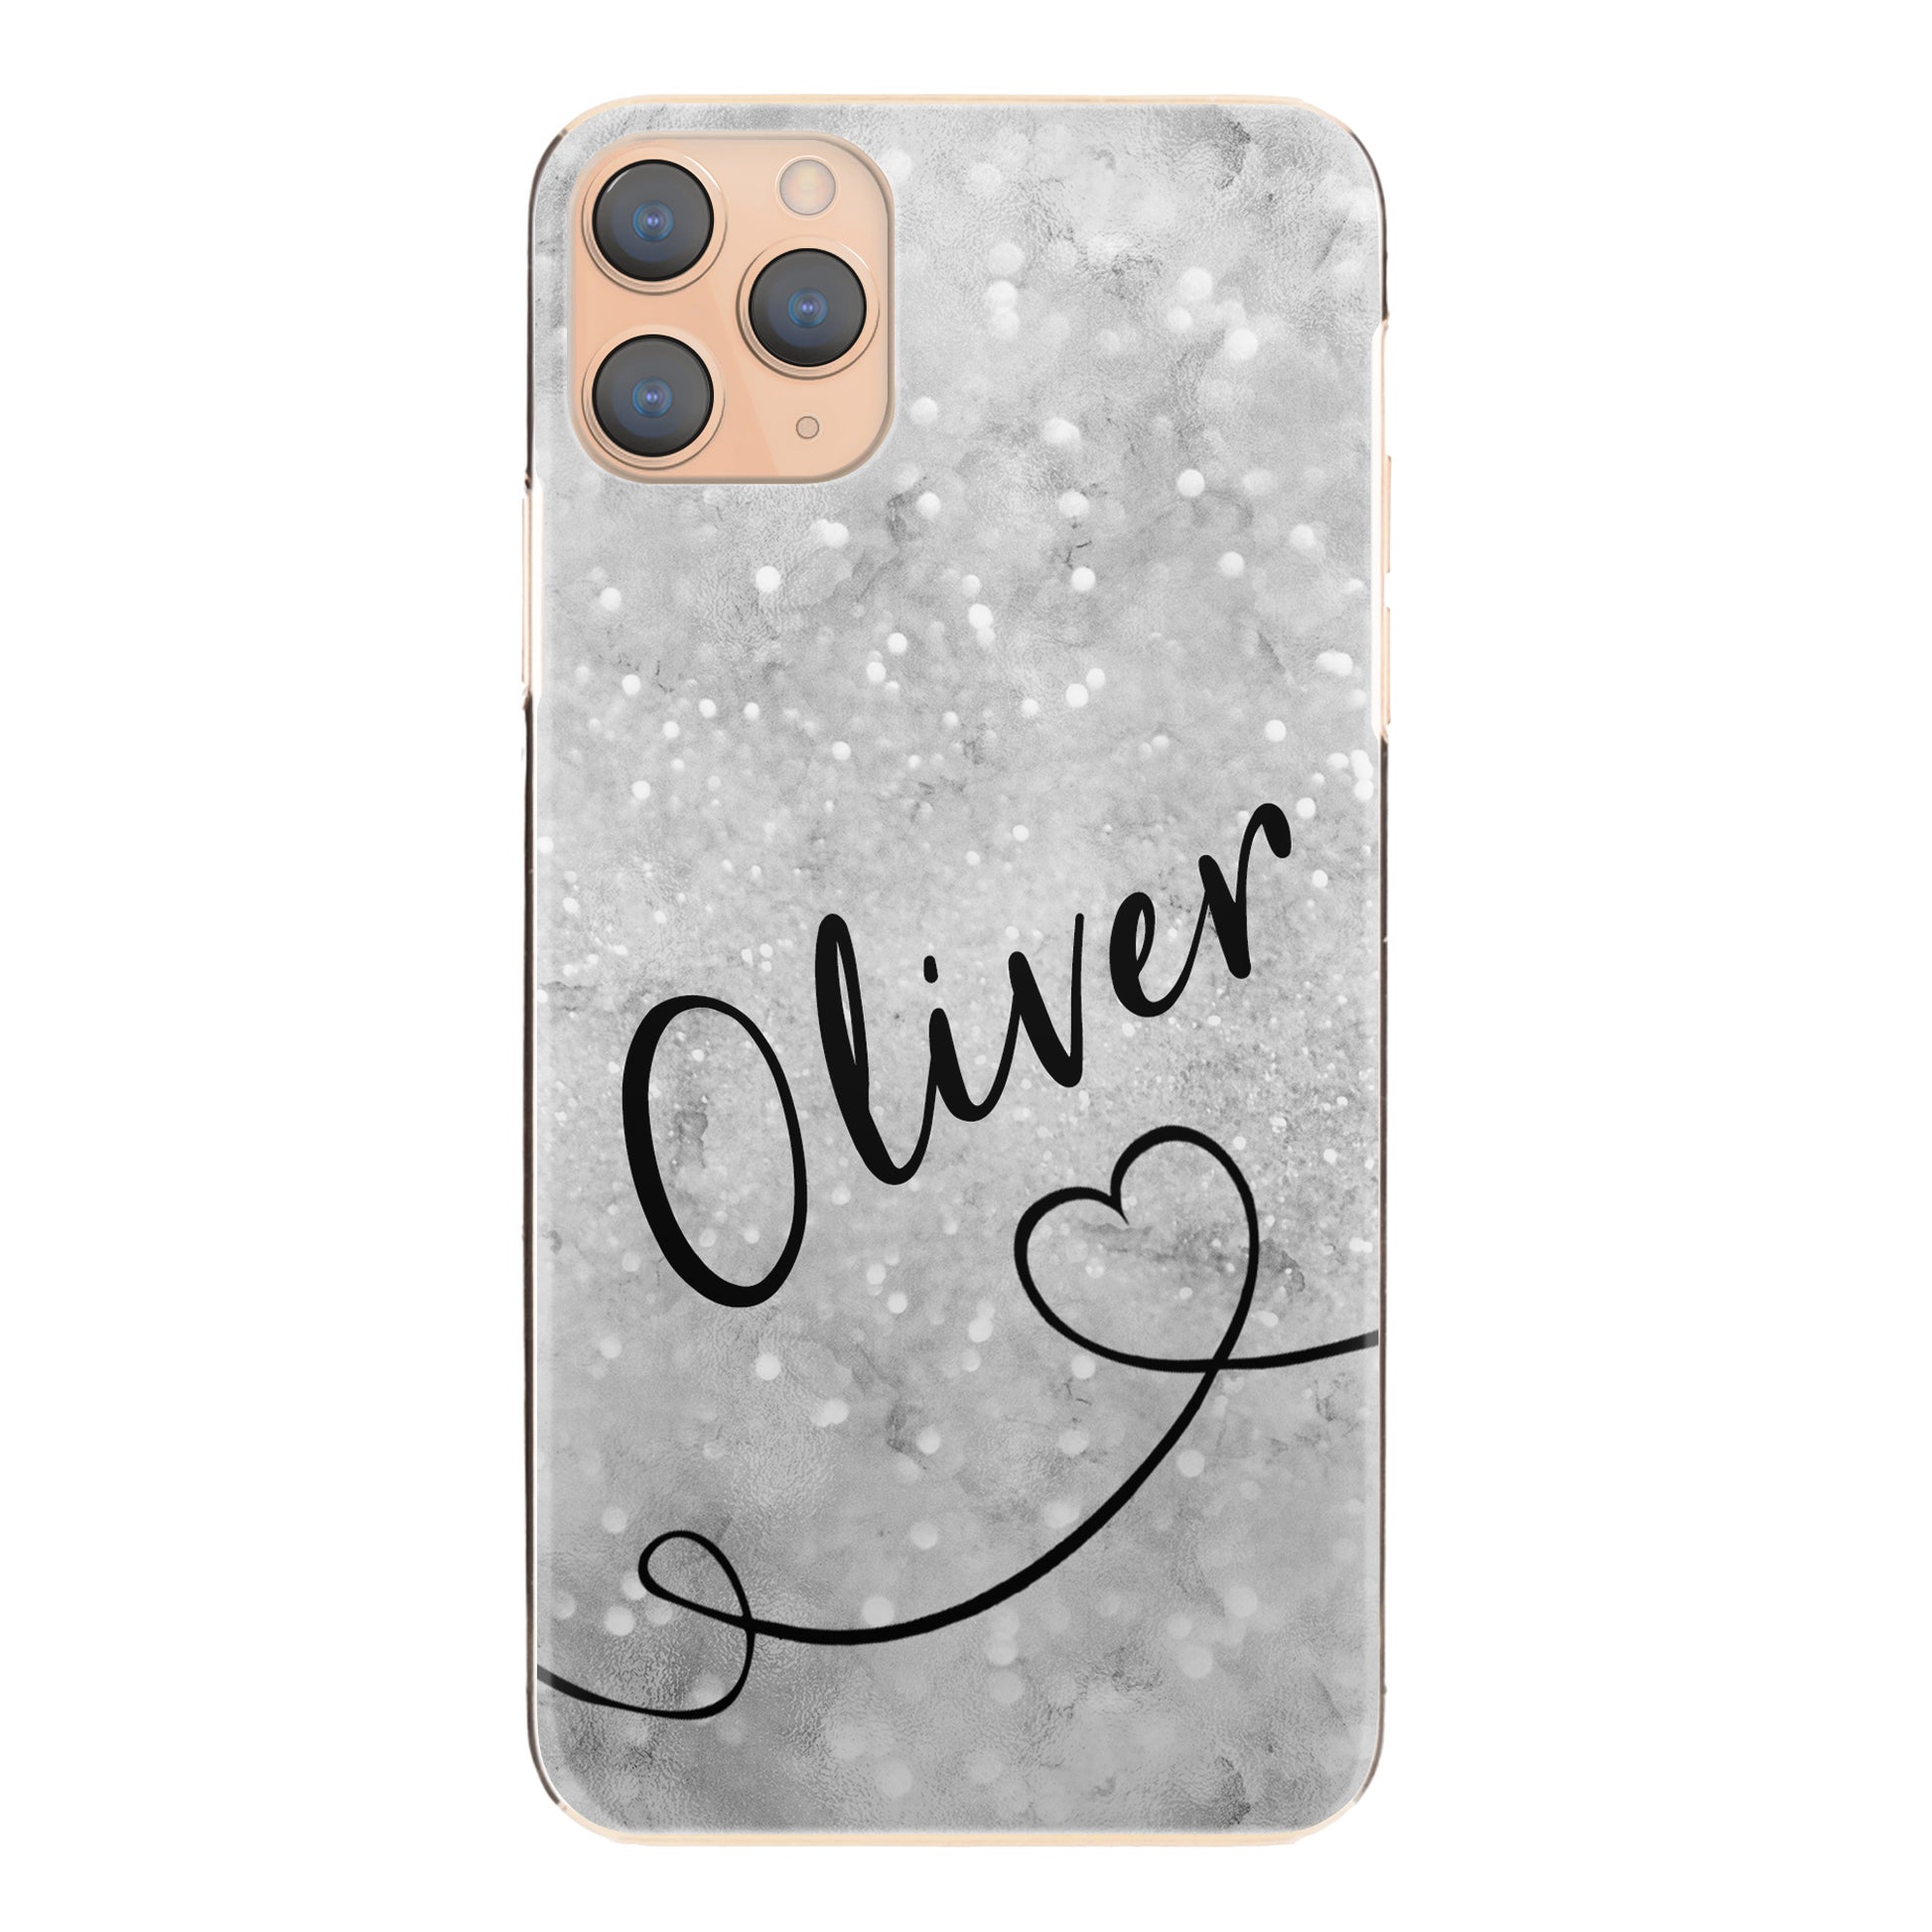 Personalised HTC Phone Hard Case with Stylish Text and Heart Line on Textured Grey